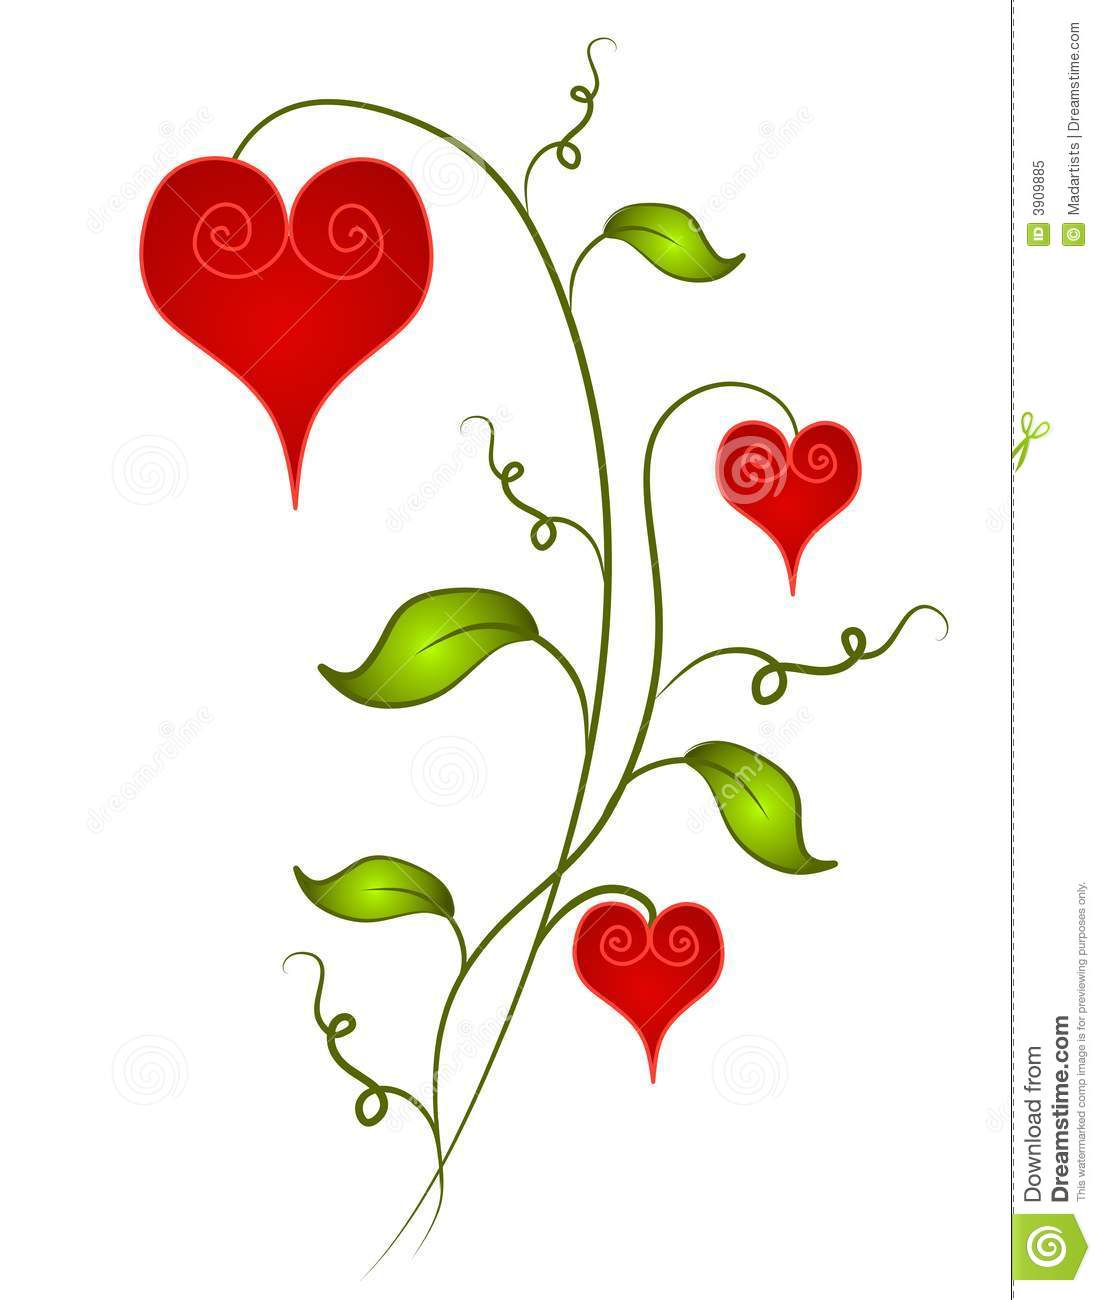 Illustration Featuring Heart Shaped Flowers In Red Isolated On White